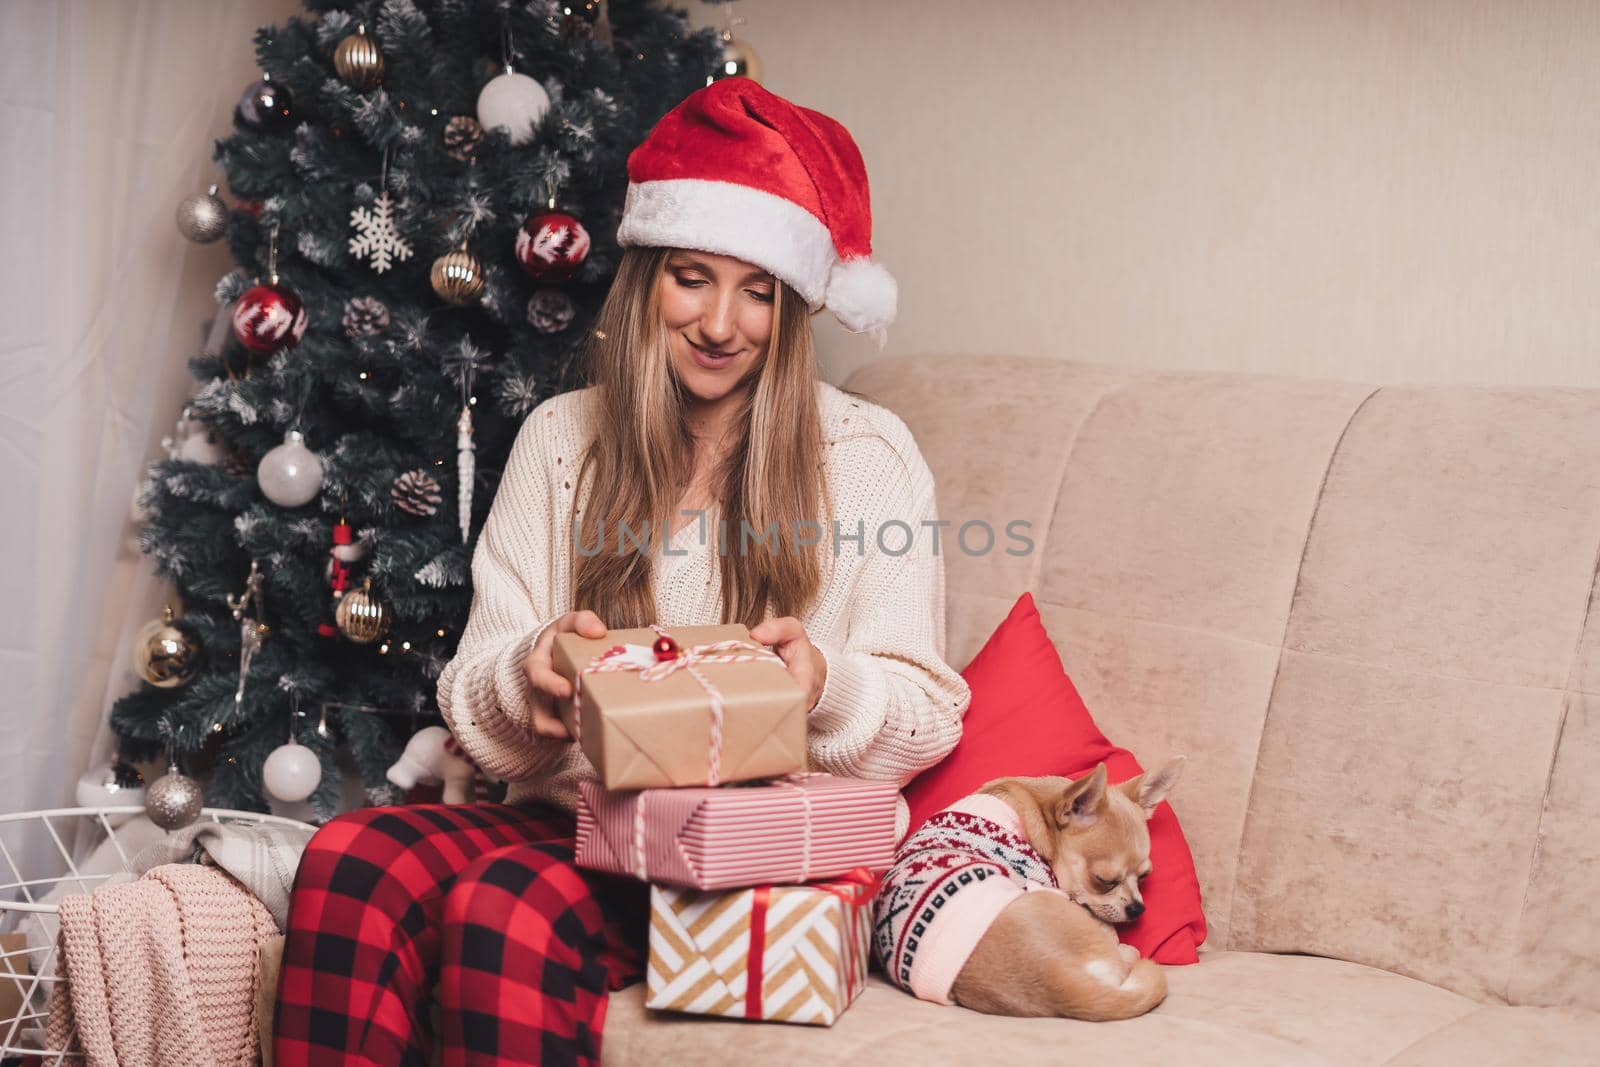 Woman in Santa hat wrapping Christmas gift boxes with puppy dog in sweater. Female sit and preparing presents on couch with decor and Christmas tree. Merry Christmas or New year DIY packing Concept.